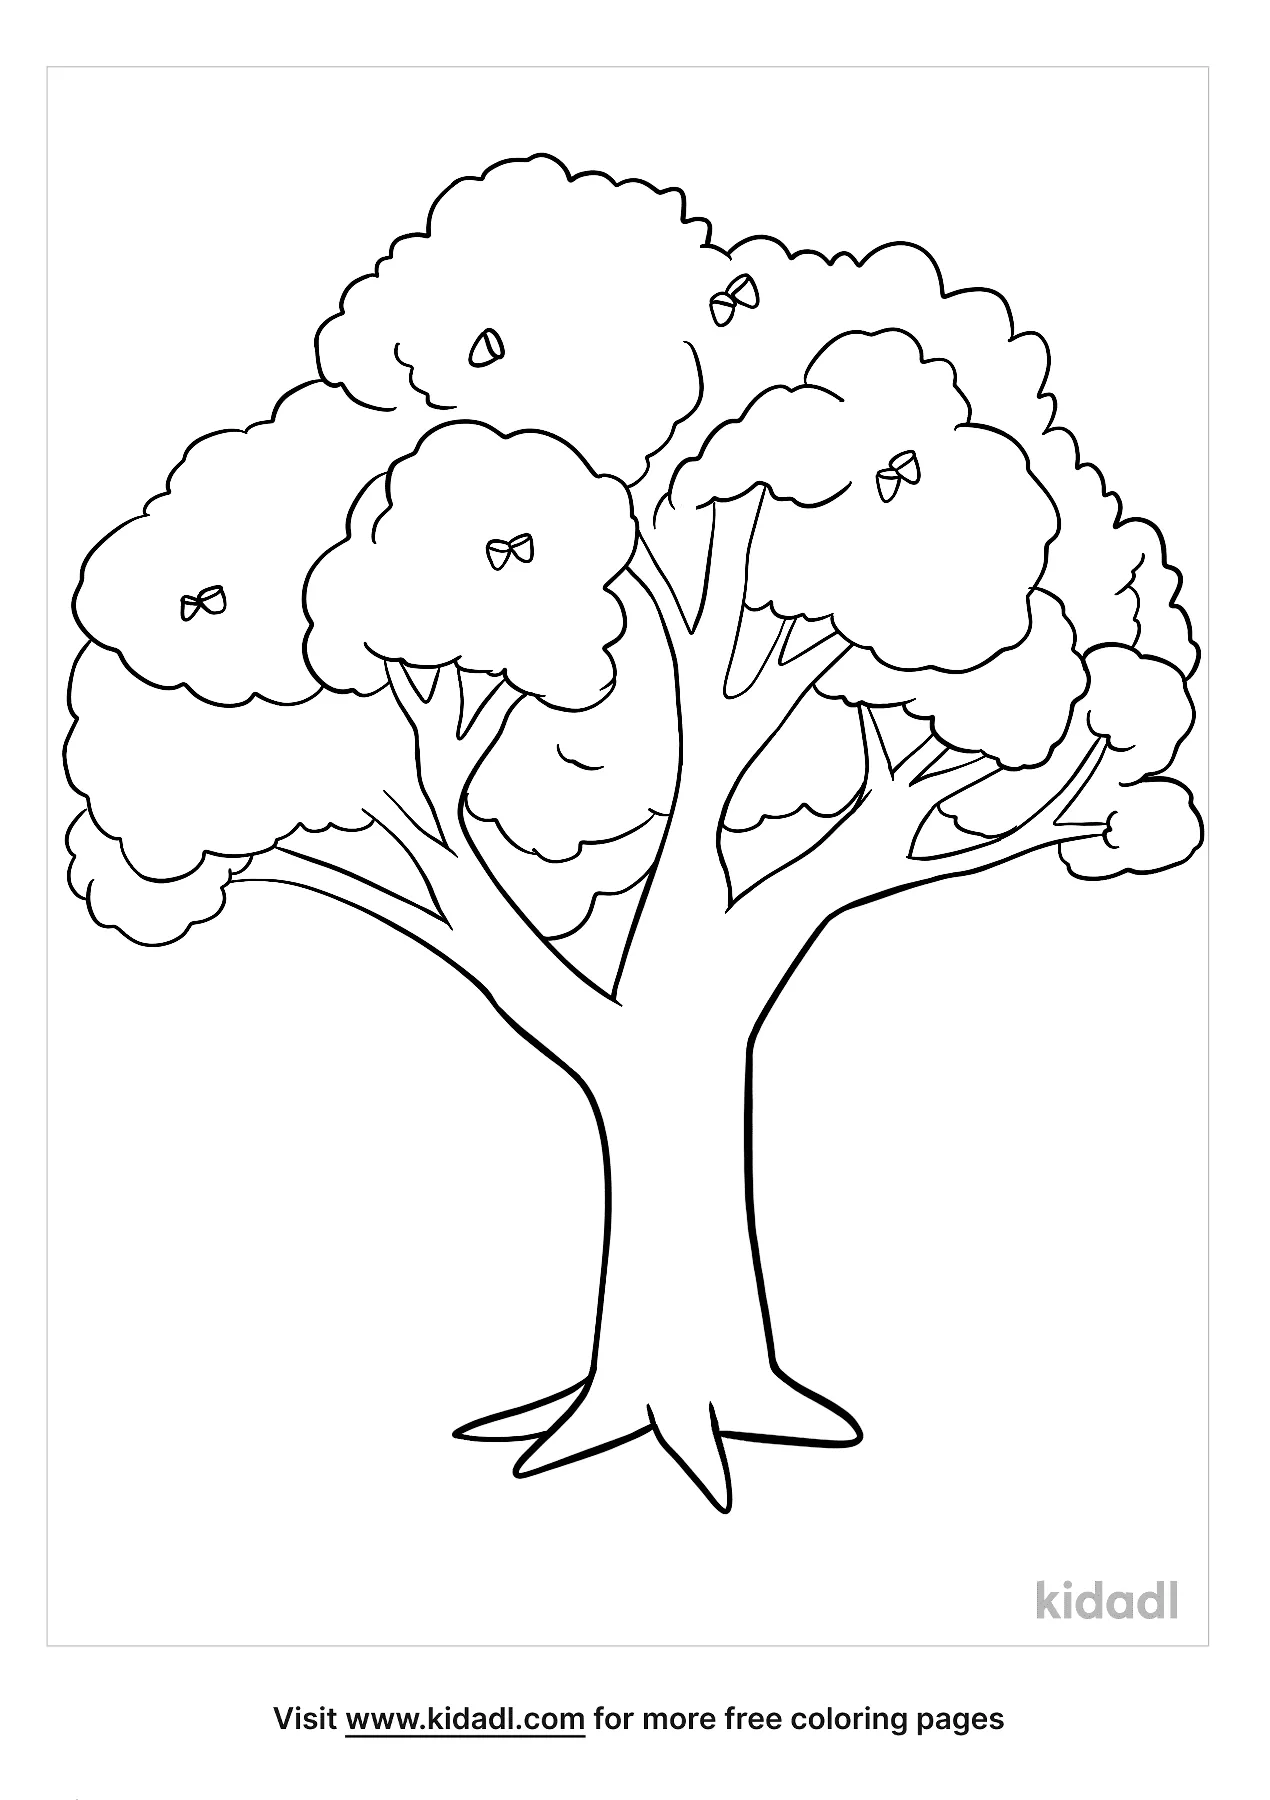 Free oak tree coloring page coloring page printables